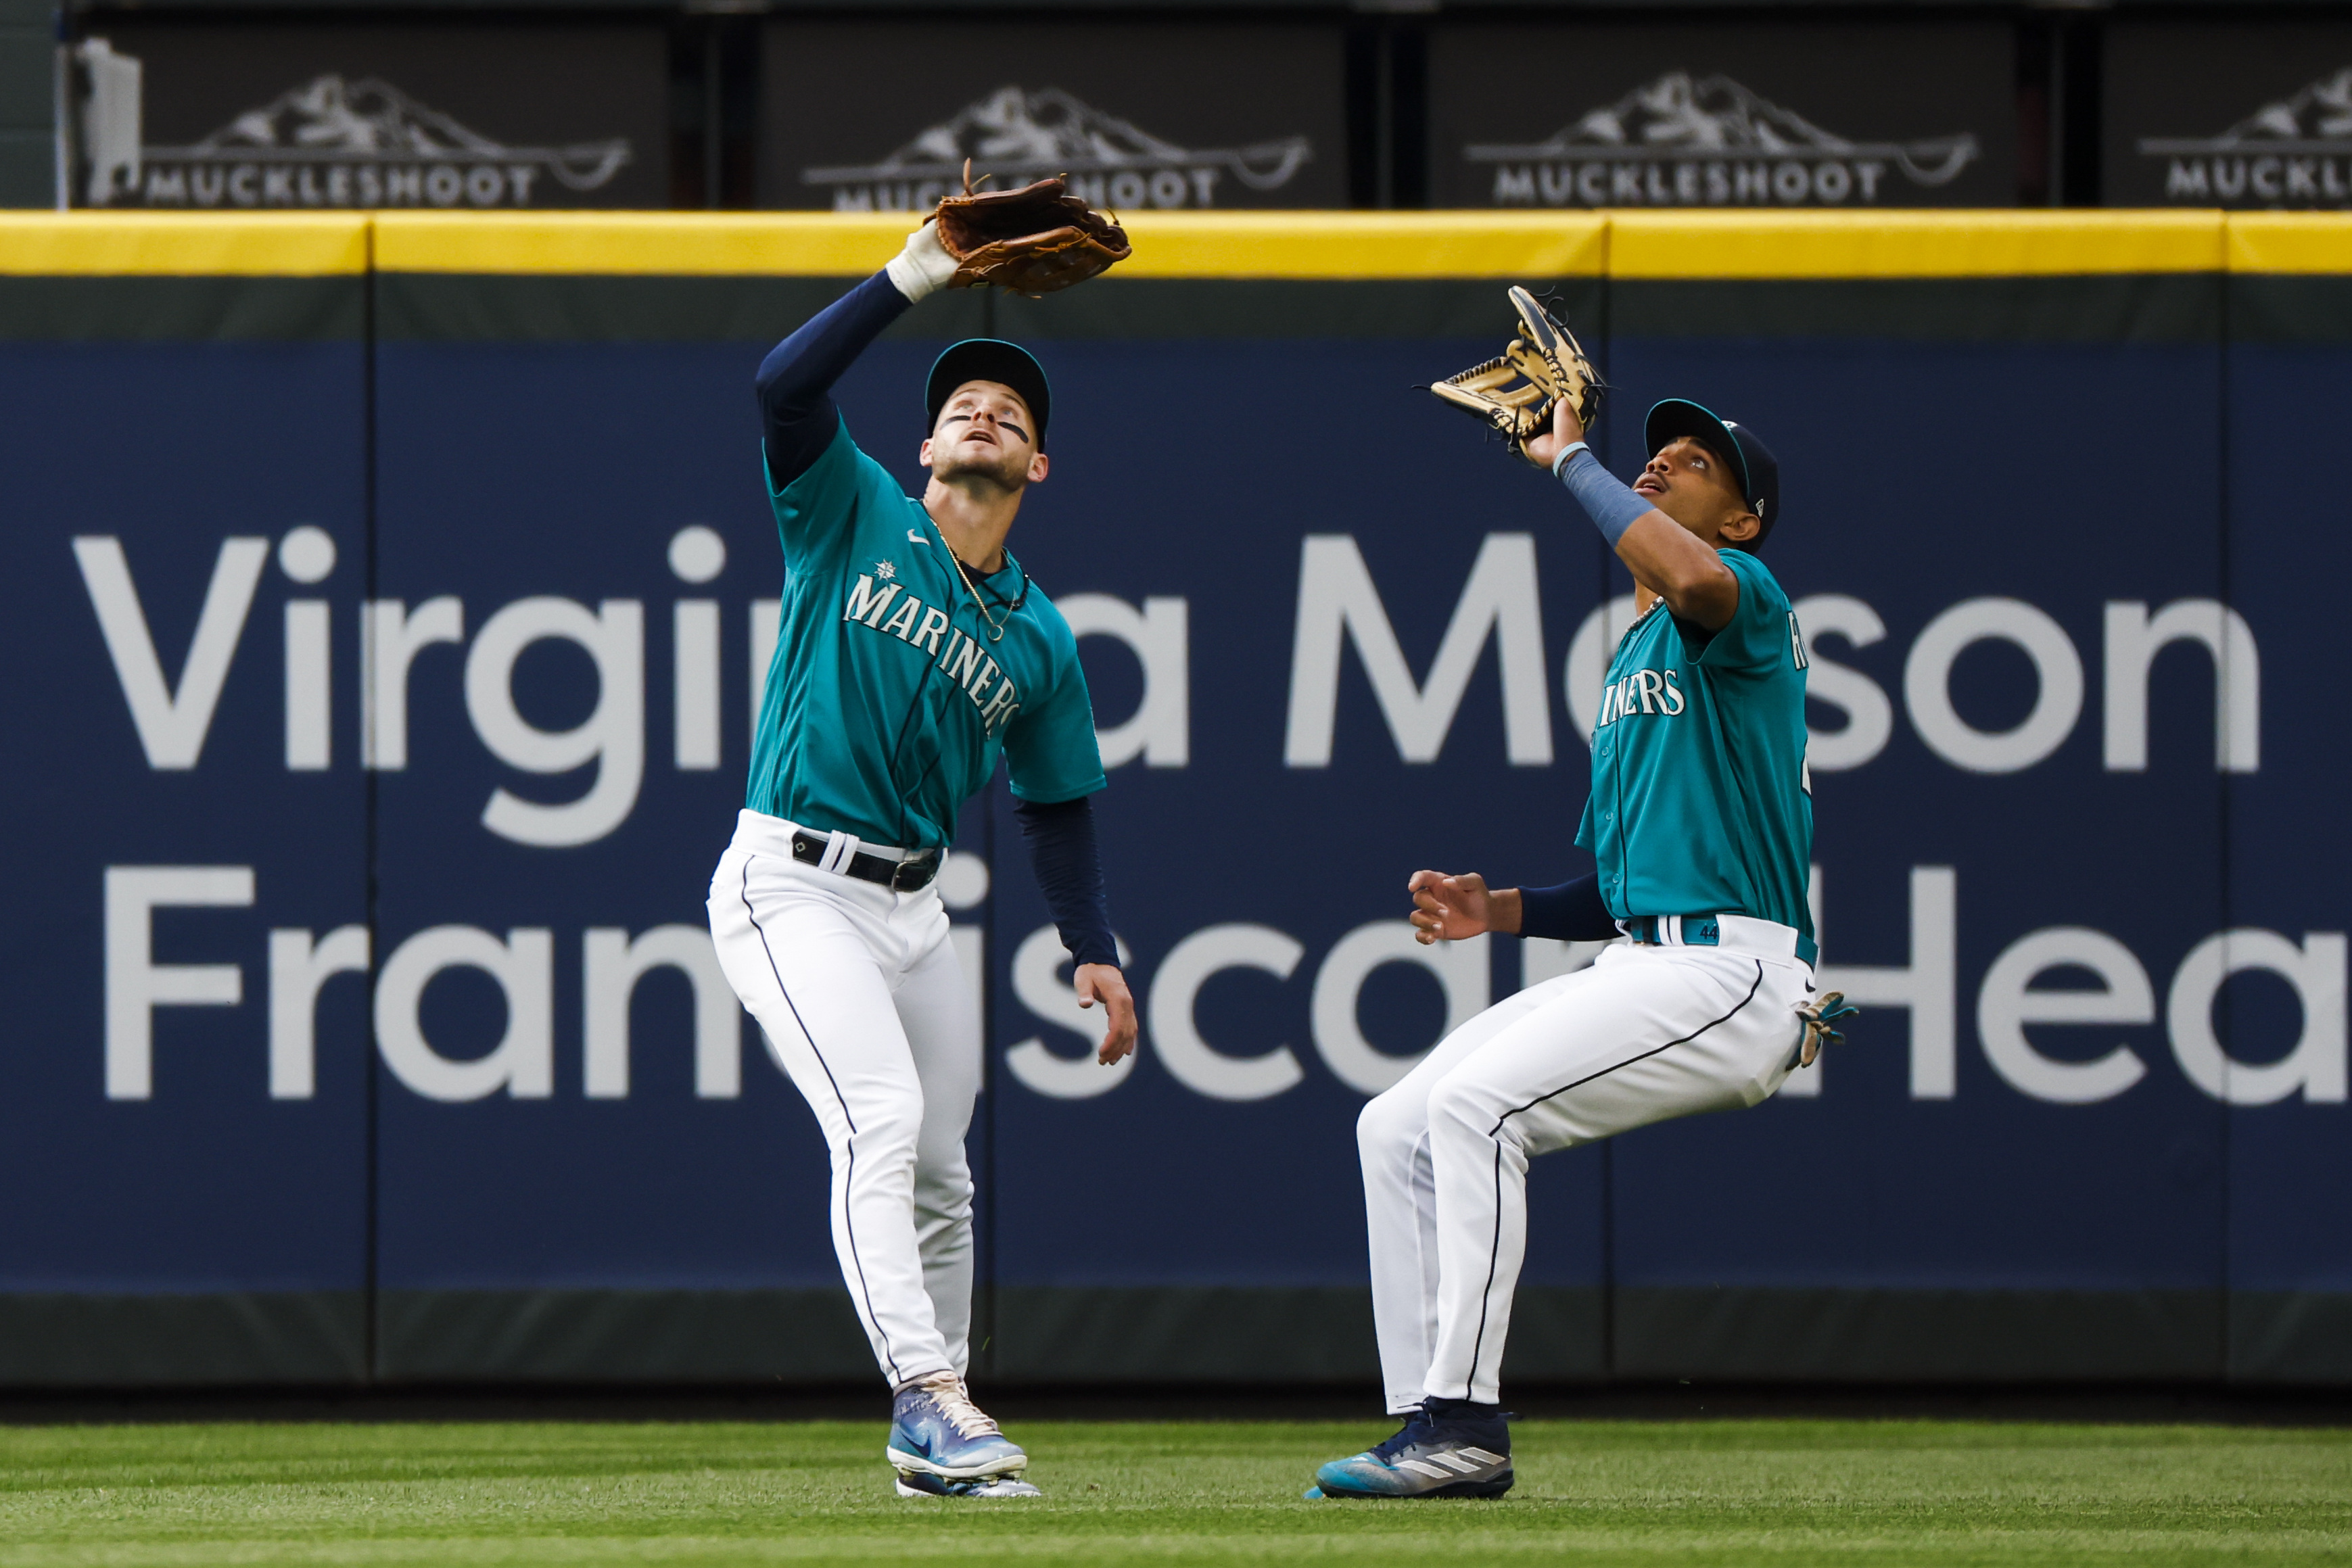 Mariners rally with 7 runs in 8th inning, top Astros 7-5 - The Columbian